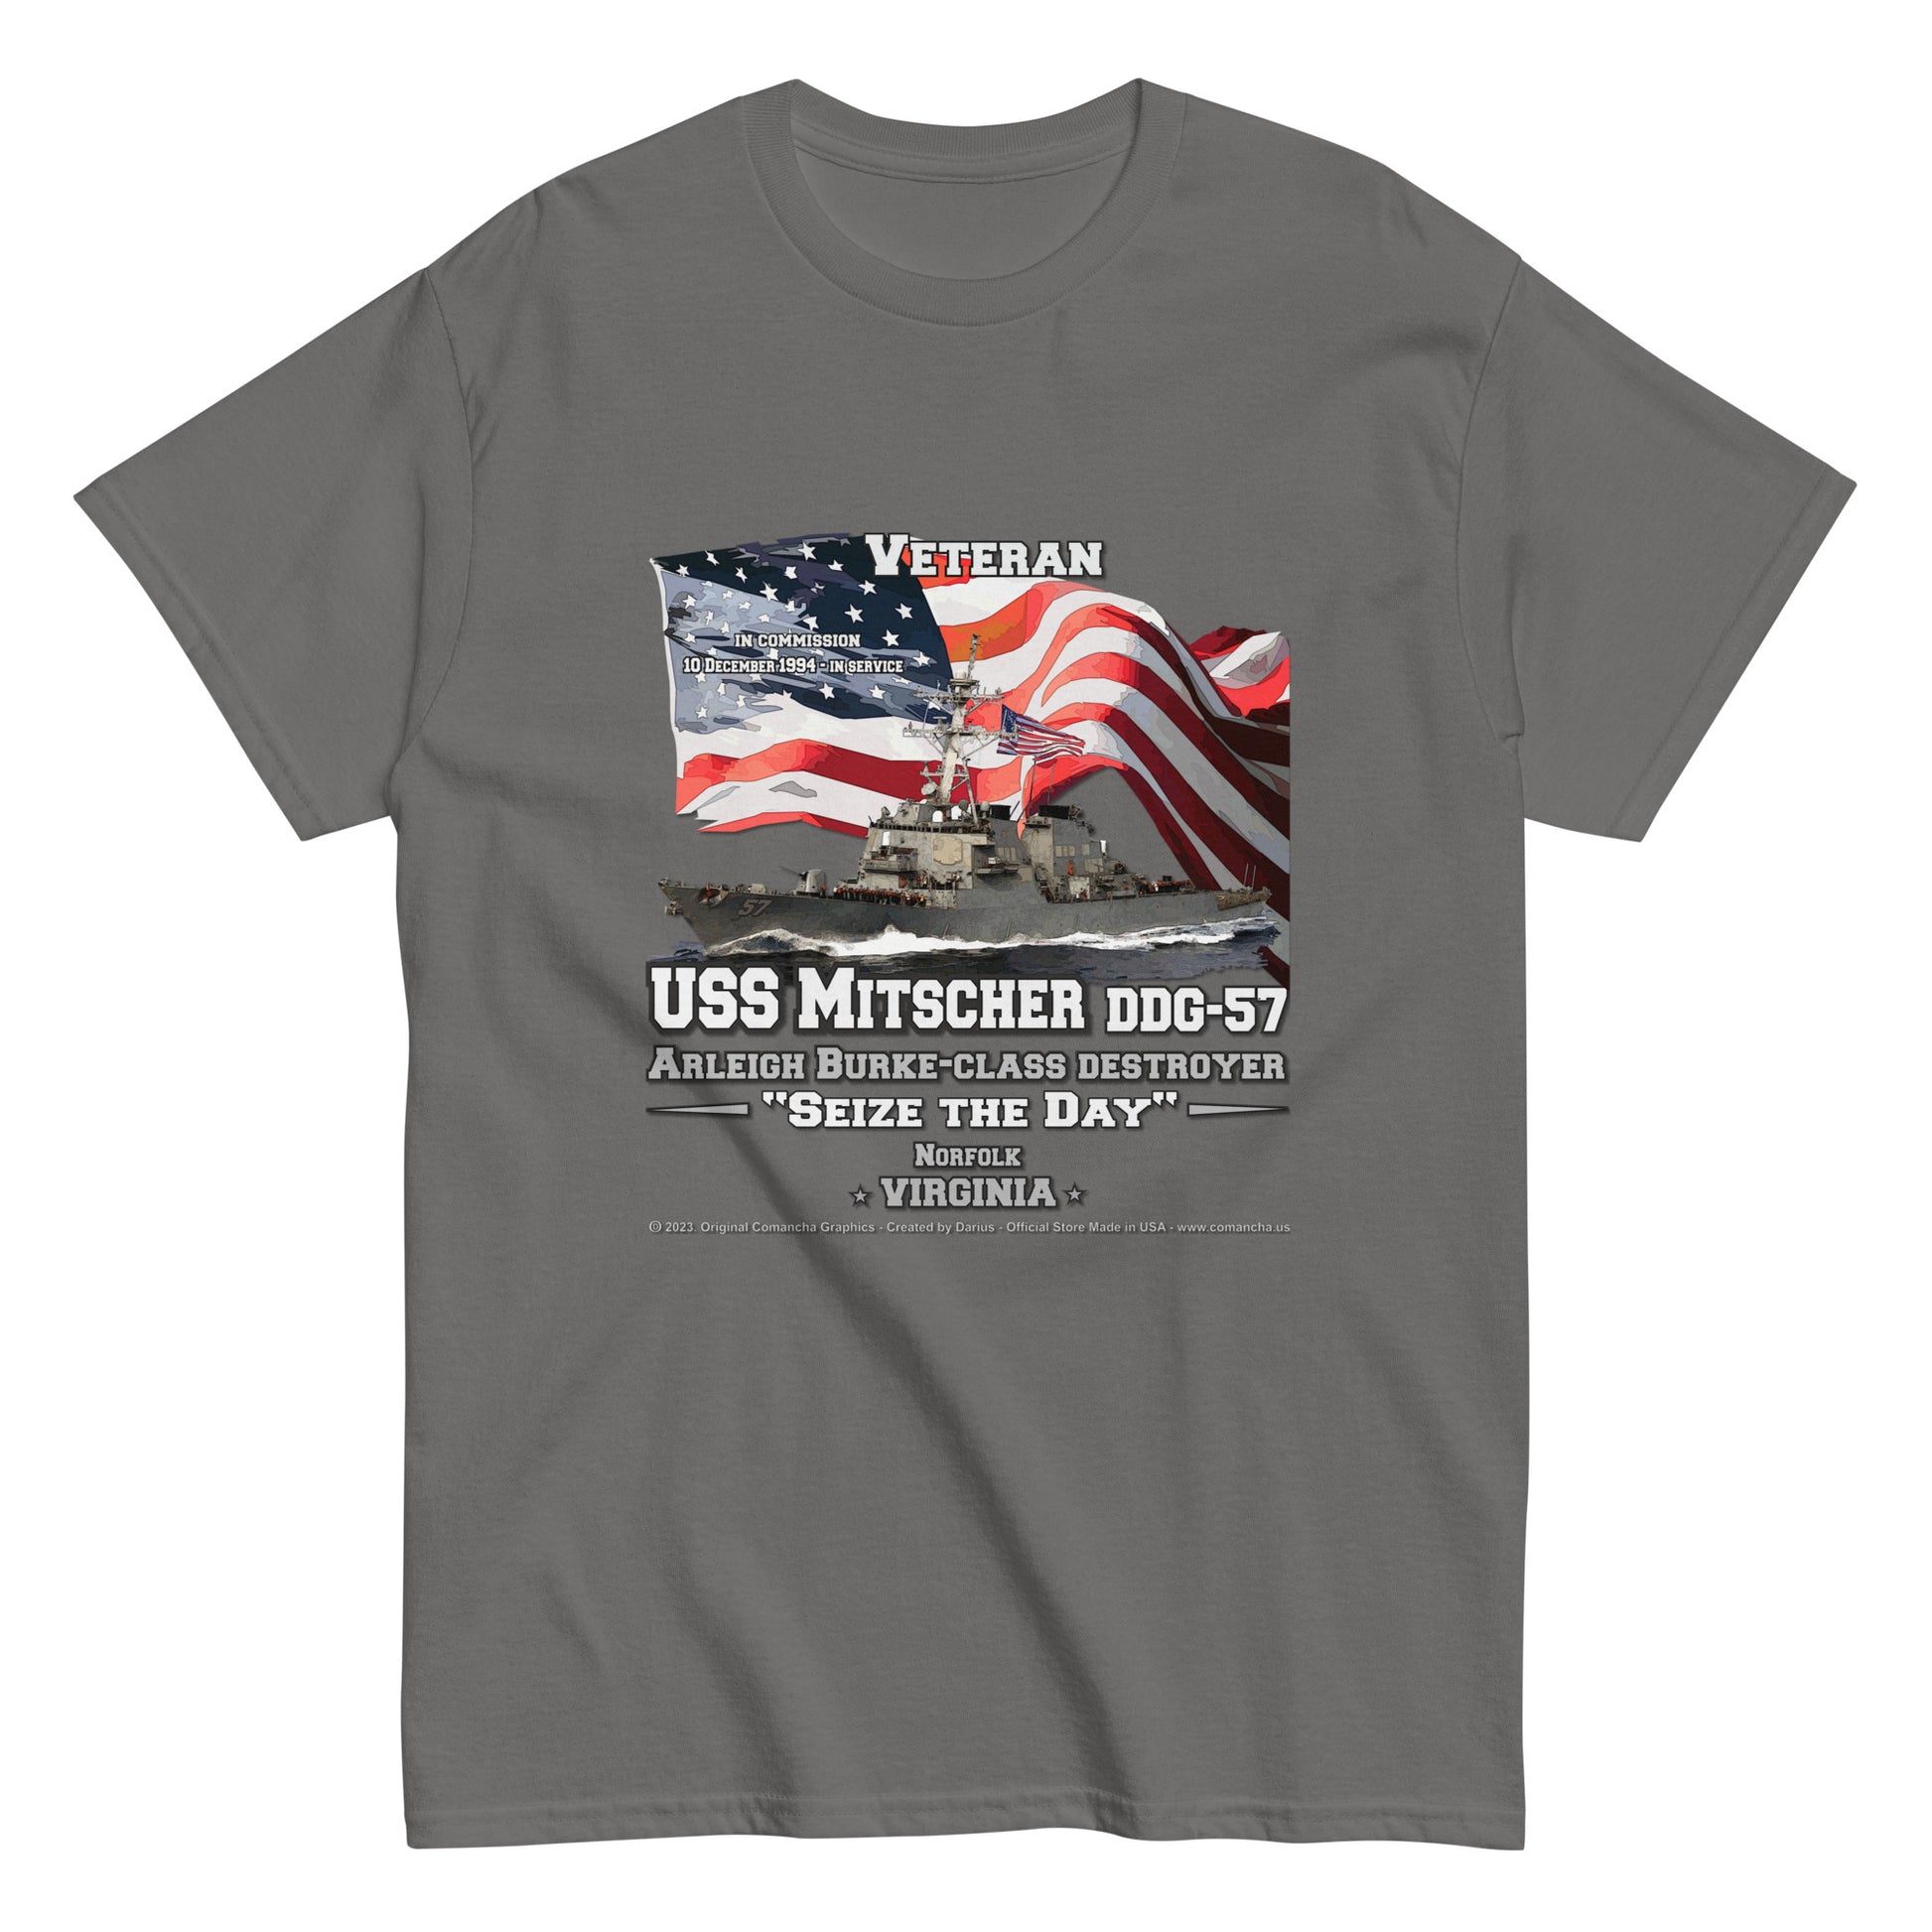 The best military T-shirts, Website with the best Navy T-shirts, Best US T-shirt designs, American T-shirt Pride, US T-shirts, Veterans T-shirt, Veteran's Day,